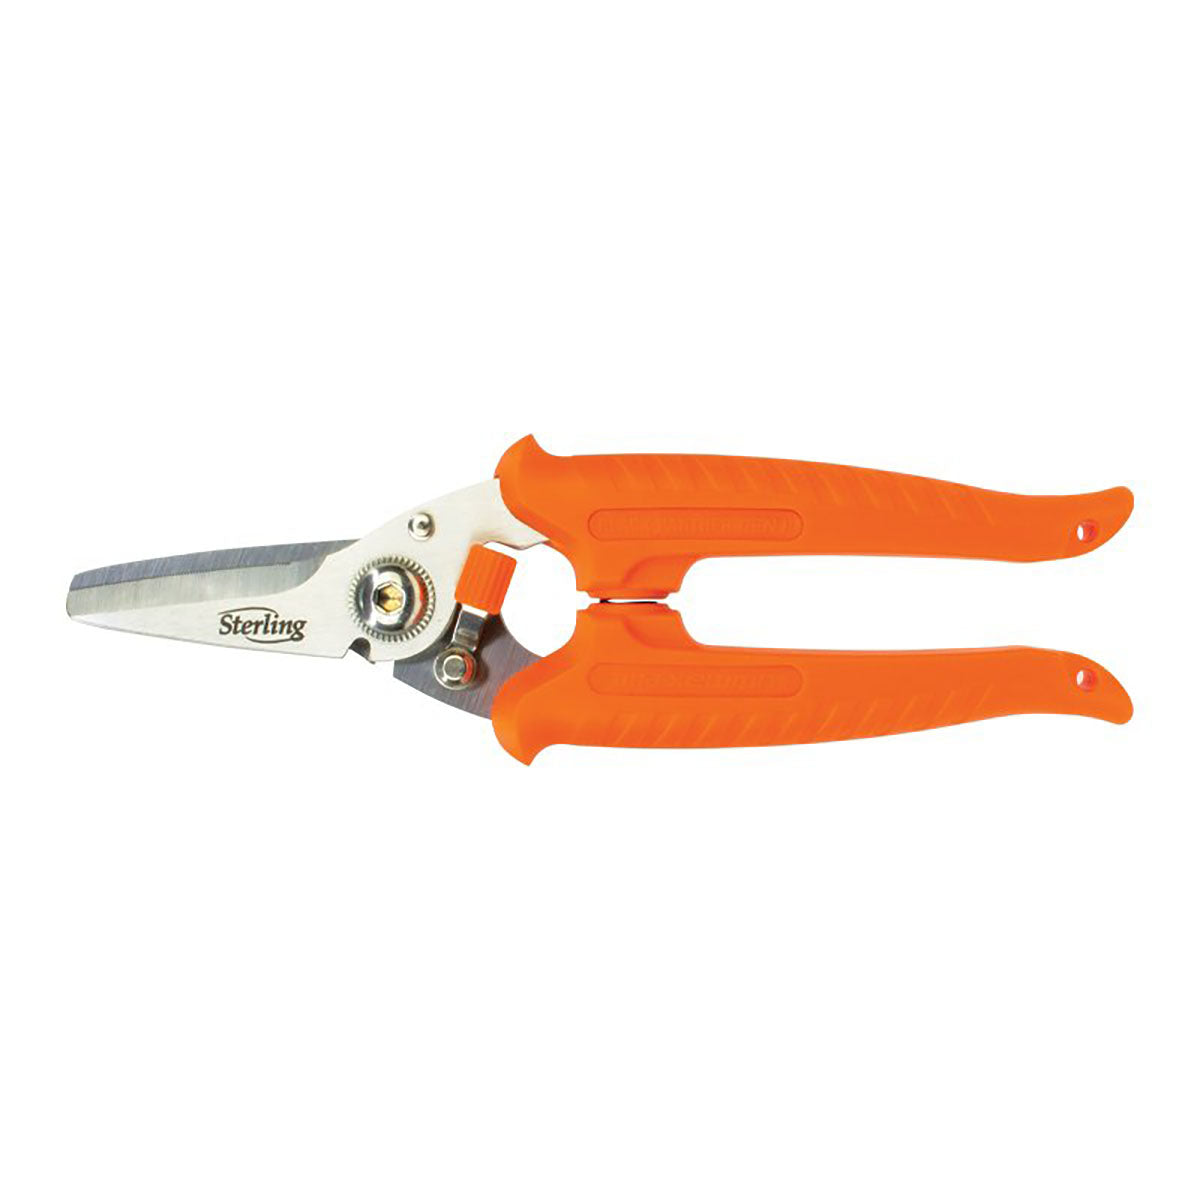 Black Panther 29724 Heavy Duty Industrial Snips Round Tip